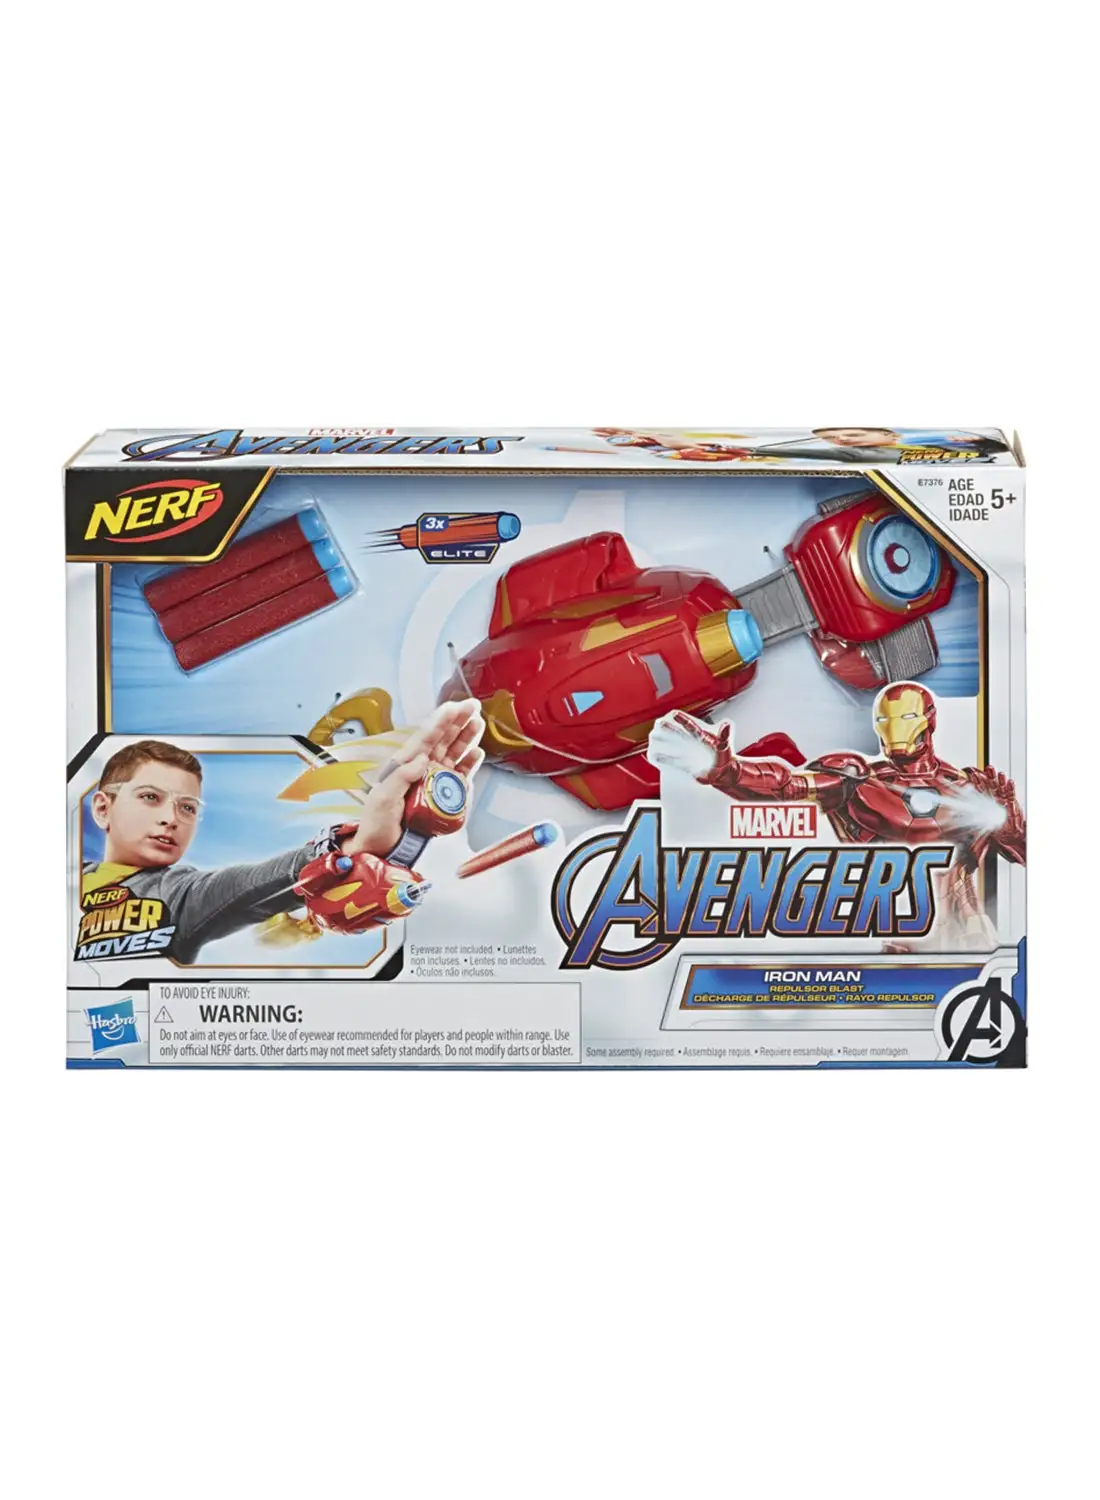 MARVEL Nerf Power Moves Marvel Avengers Iron Man Repulsor Blast Gauntlet Nerf Dart-Launching Toy For Kids Roleplay, Toys For Kids Ages 5 And Up